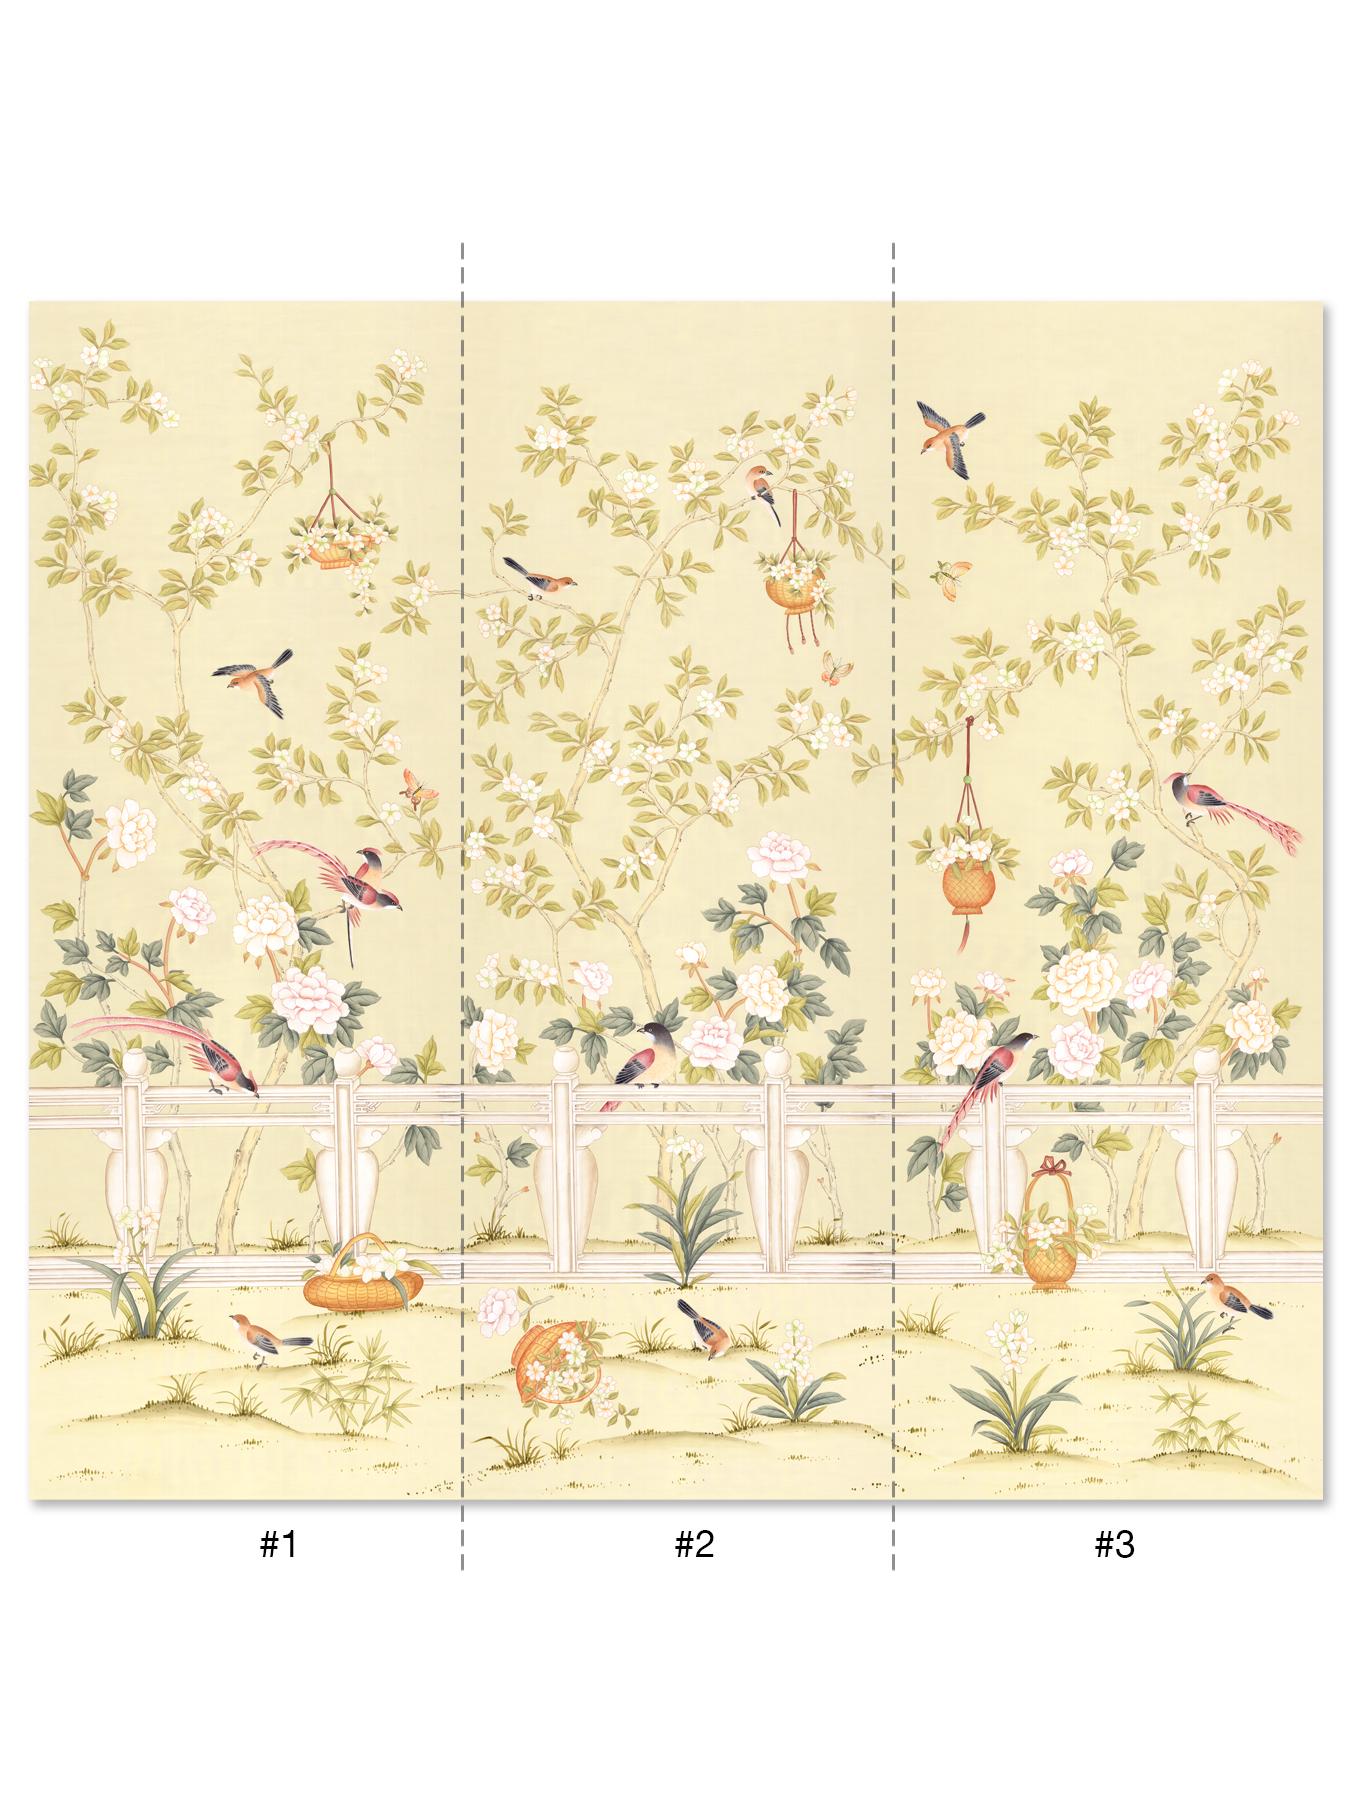 Based on a Classic design, Orsay Garden is a quintessential chinoiserie mural. Painted in cheerful spring tones on a sunny yellow silk ground, Orsay Garden exudes elegance and charm. The mural is comprised of three separate panels of paper, each 3